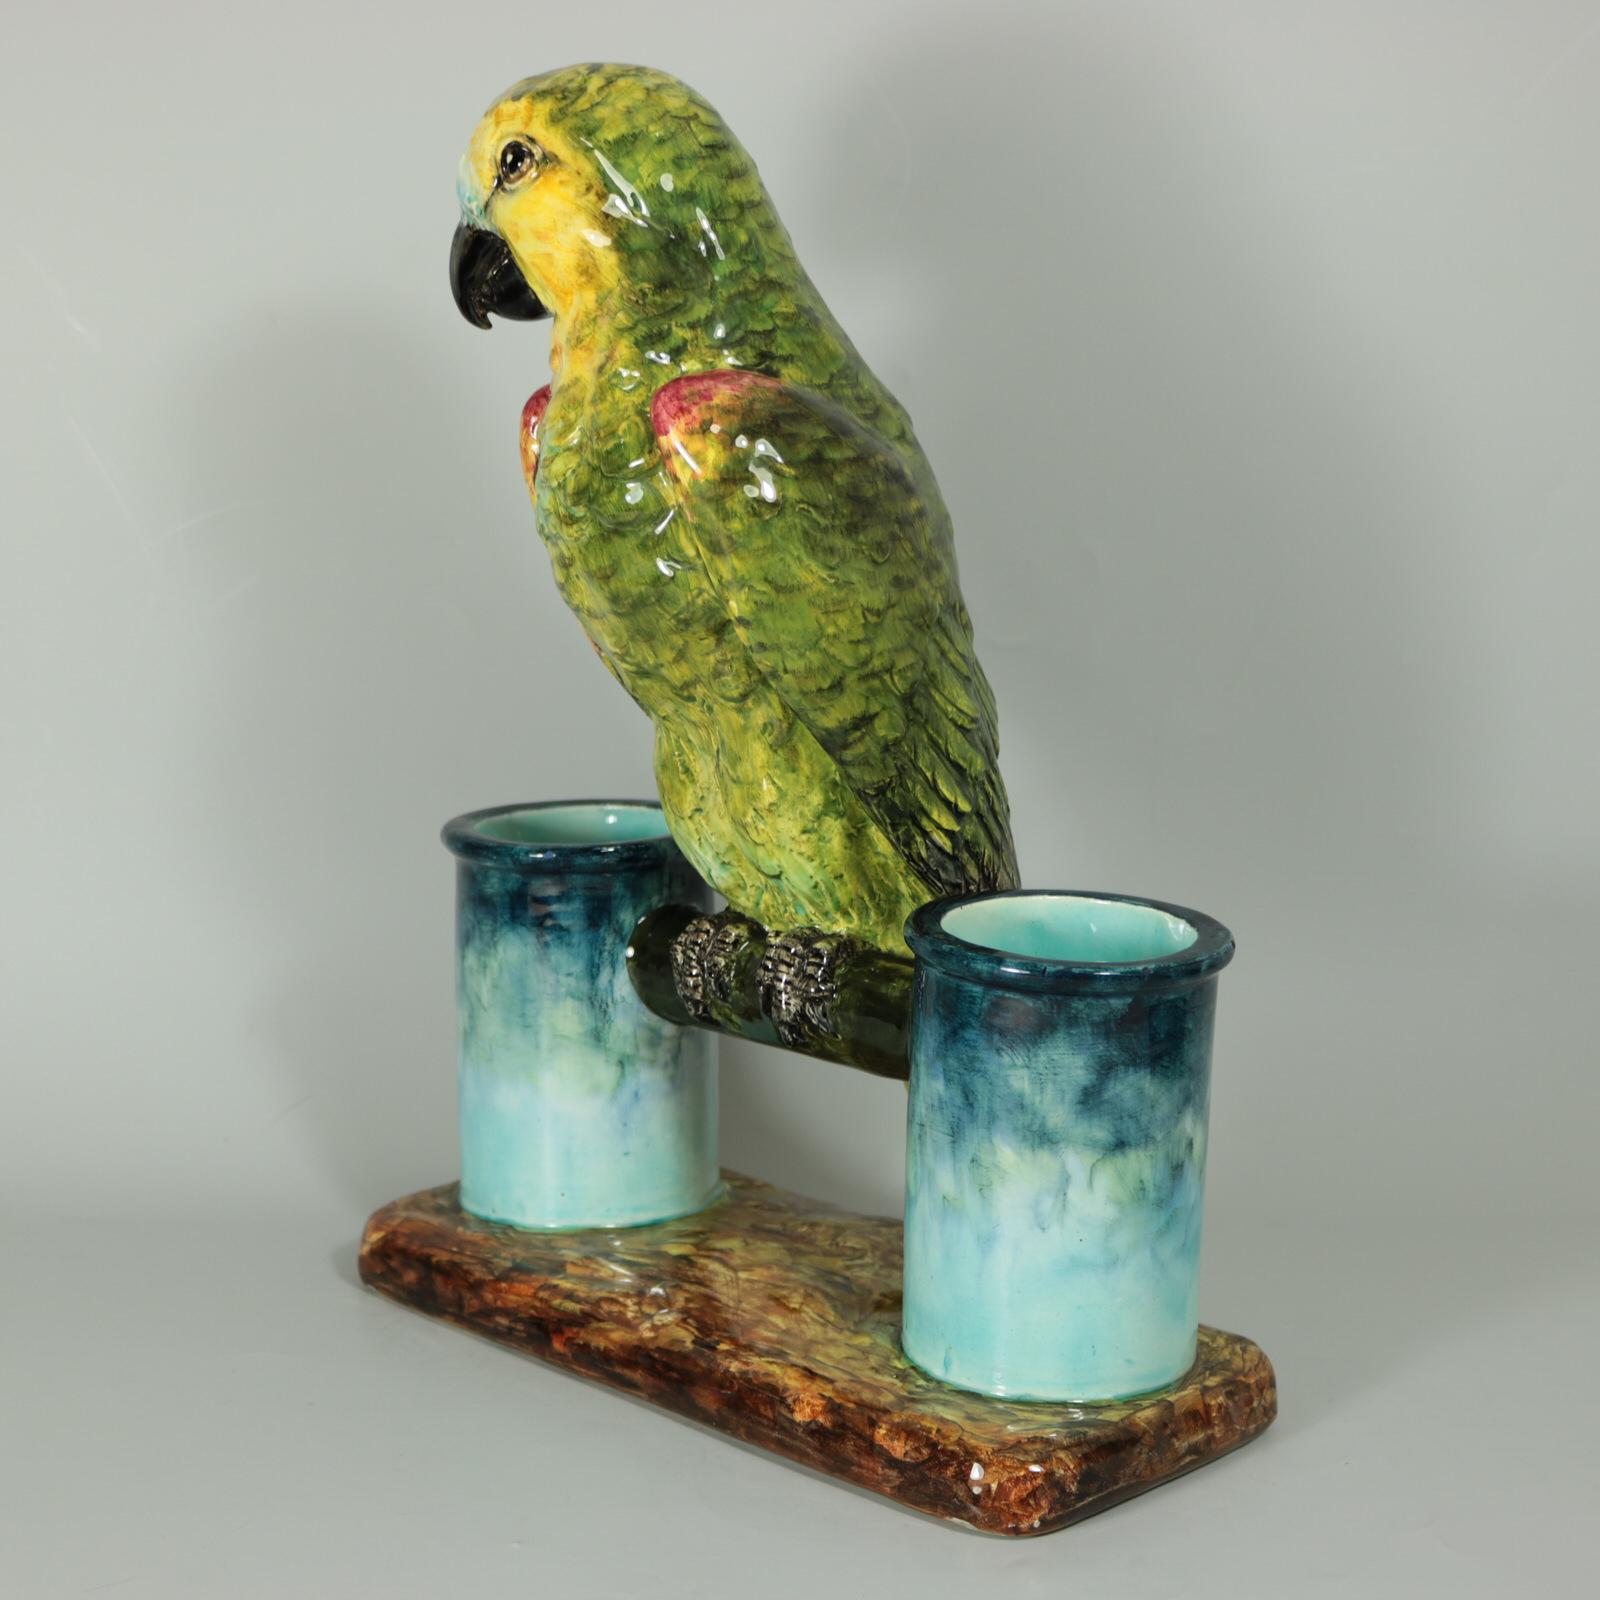 Delphin Massier French Majolica figural vase which features a green parrot perched in-between two cylindrical vases. Colouration: green, blue, yellow, are predominant. The piece bears maker's marks for the Delphin Massier pottery.